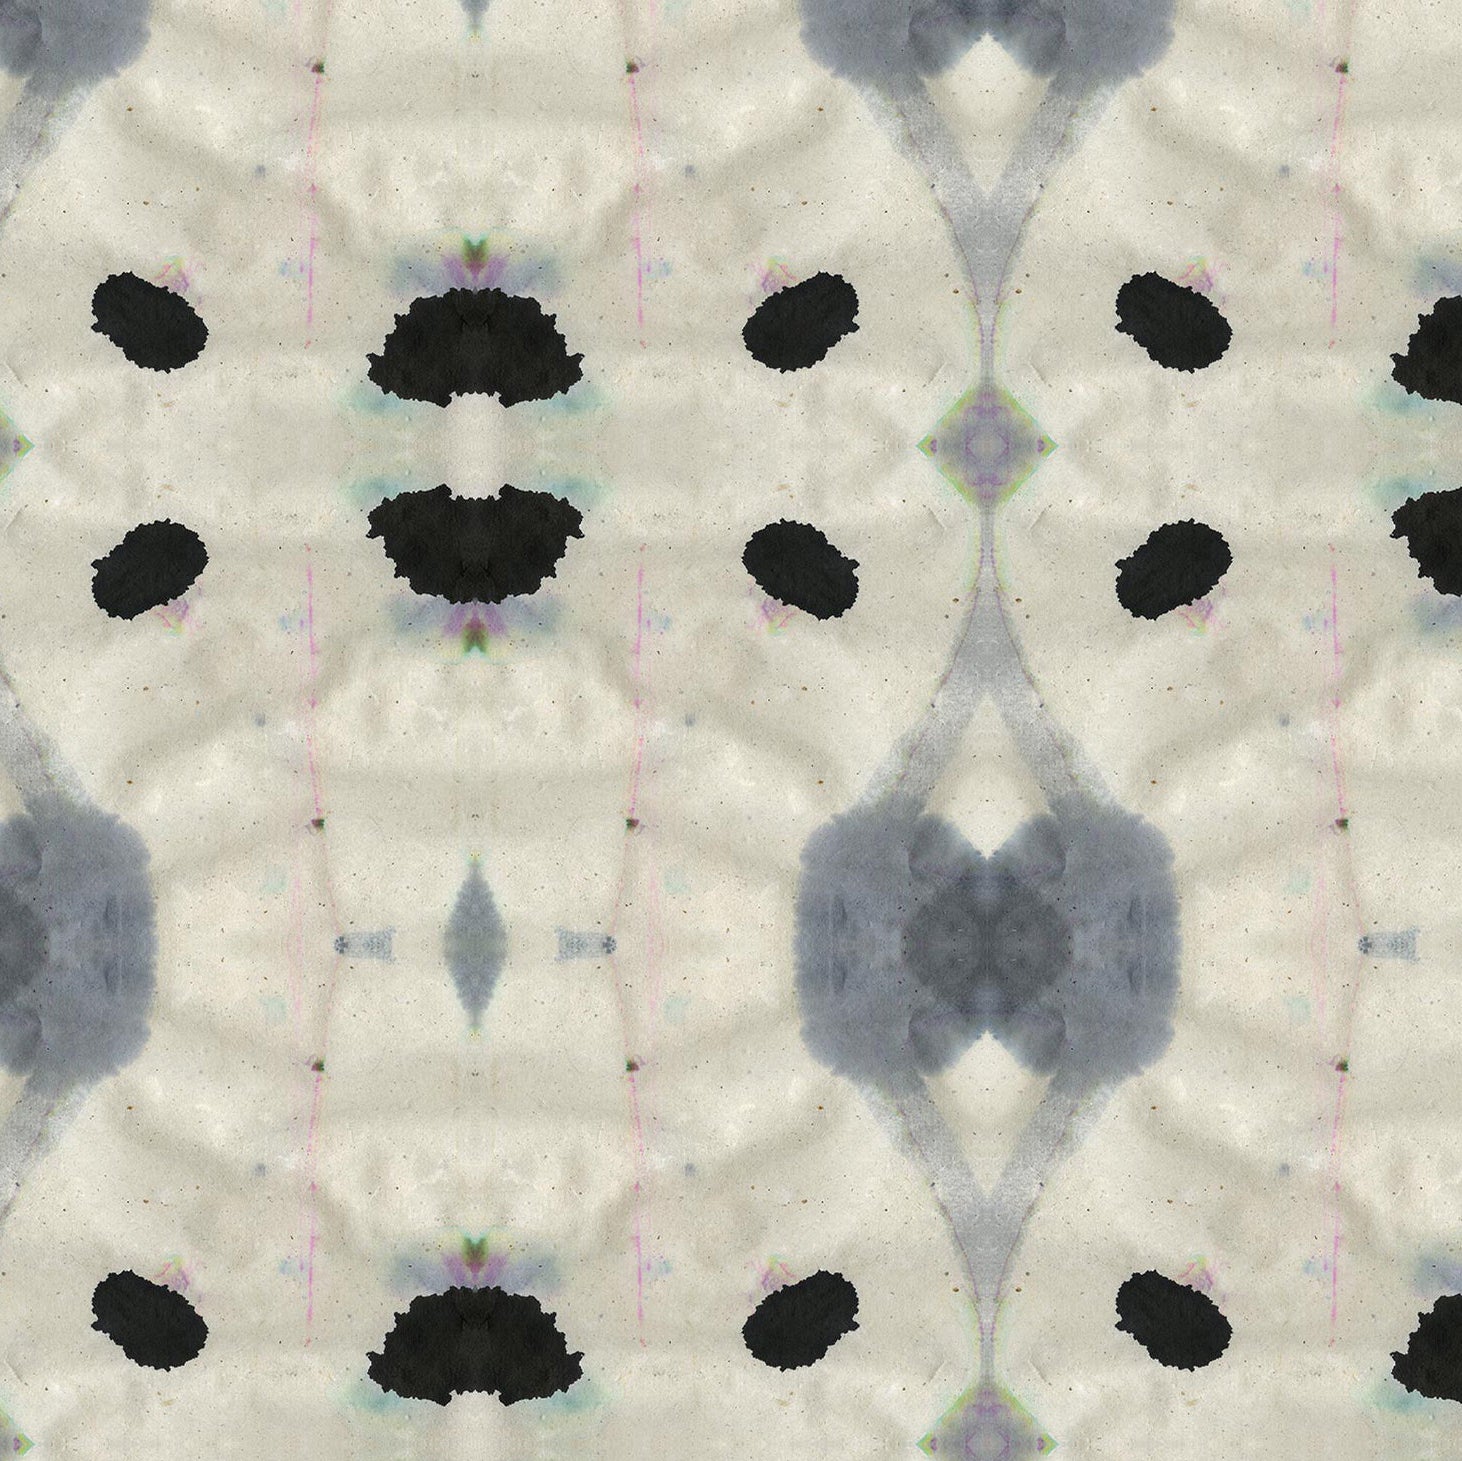 Detail of wallpaper in an abstract ink blot print in shades of charcoal and black on a tan field.